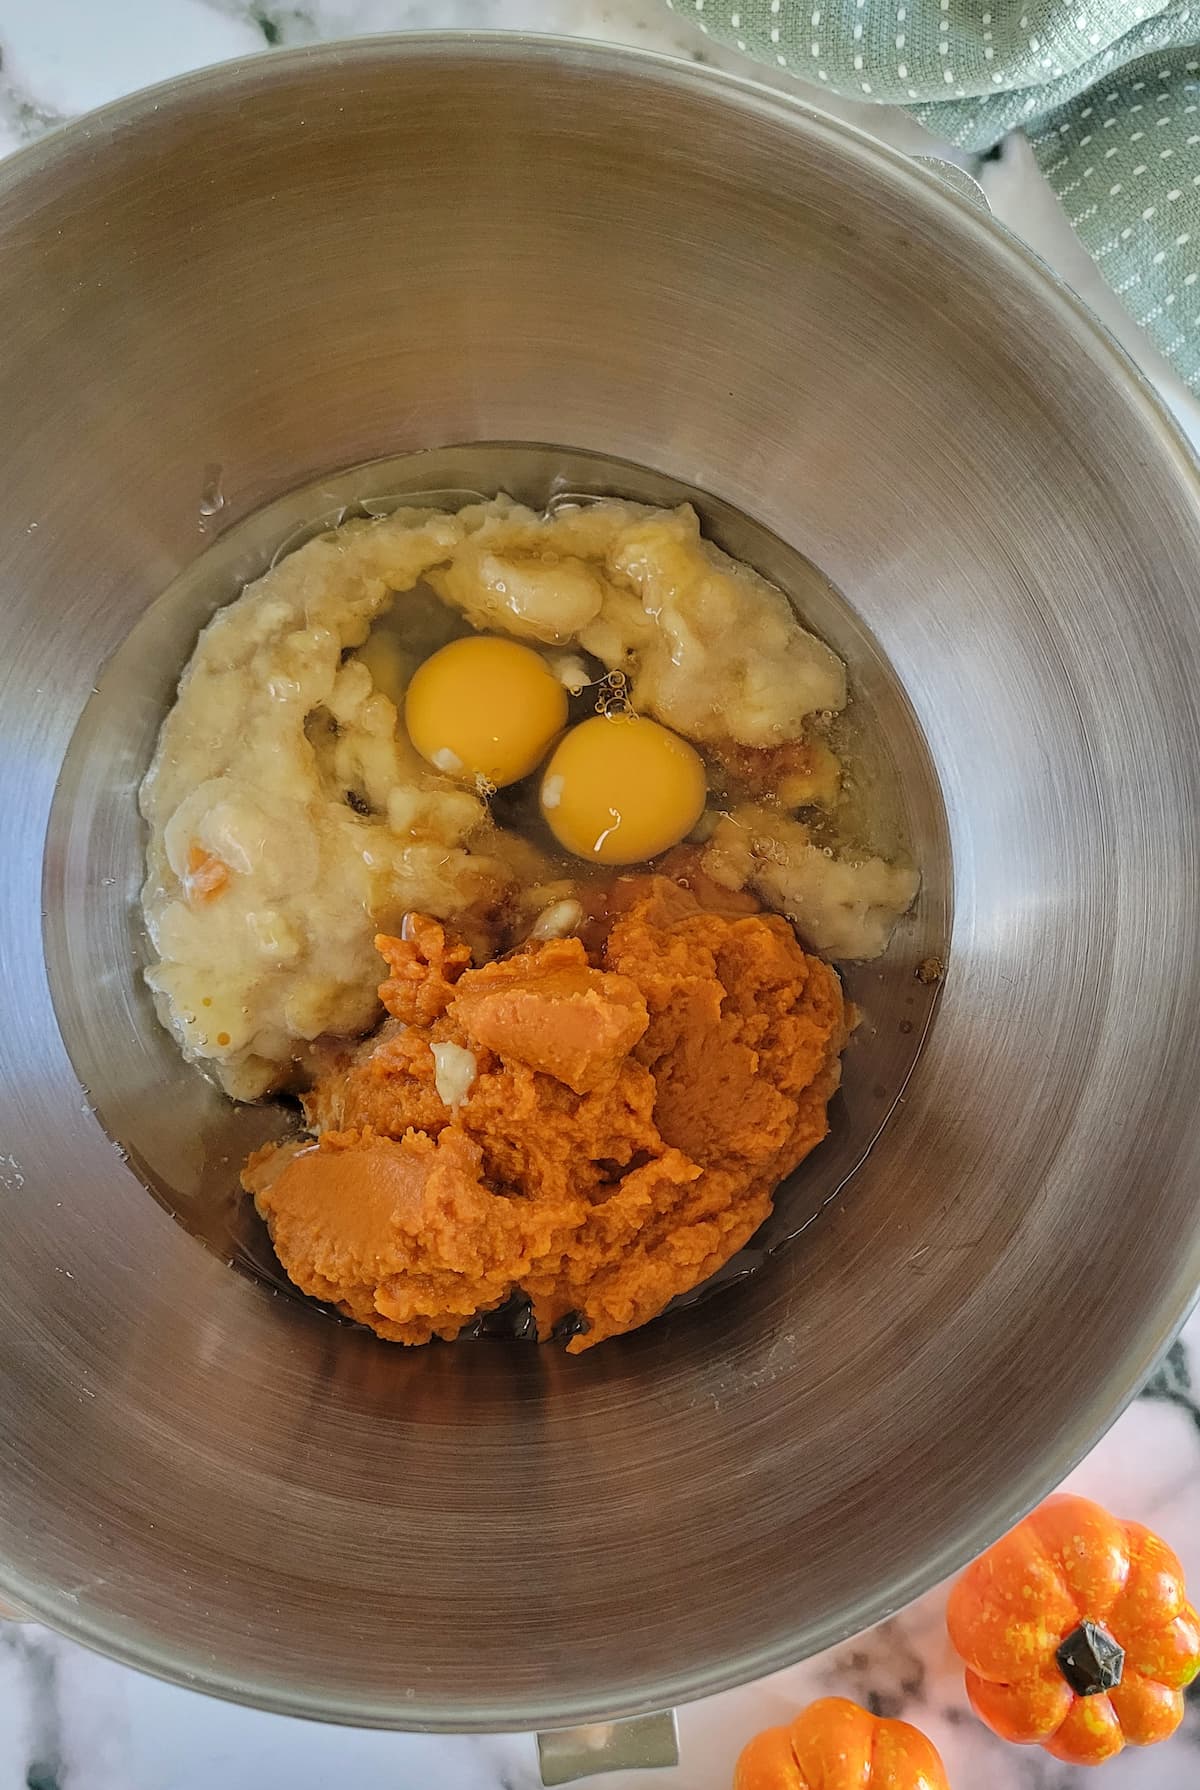 eggs, mashed bananas and pumpkin puree unmixed in a bowl